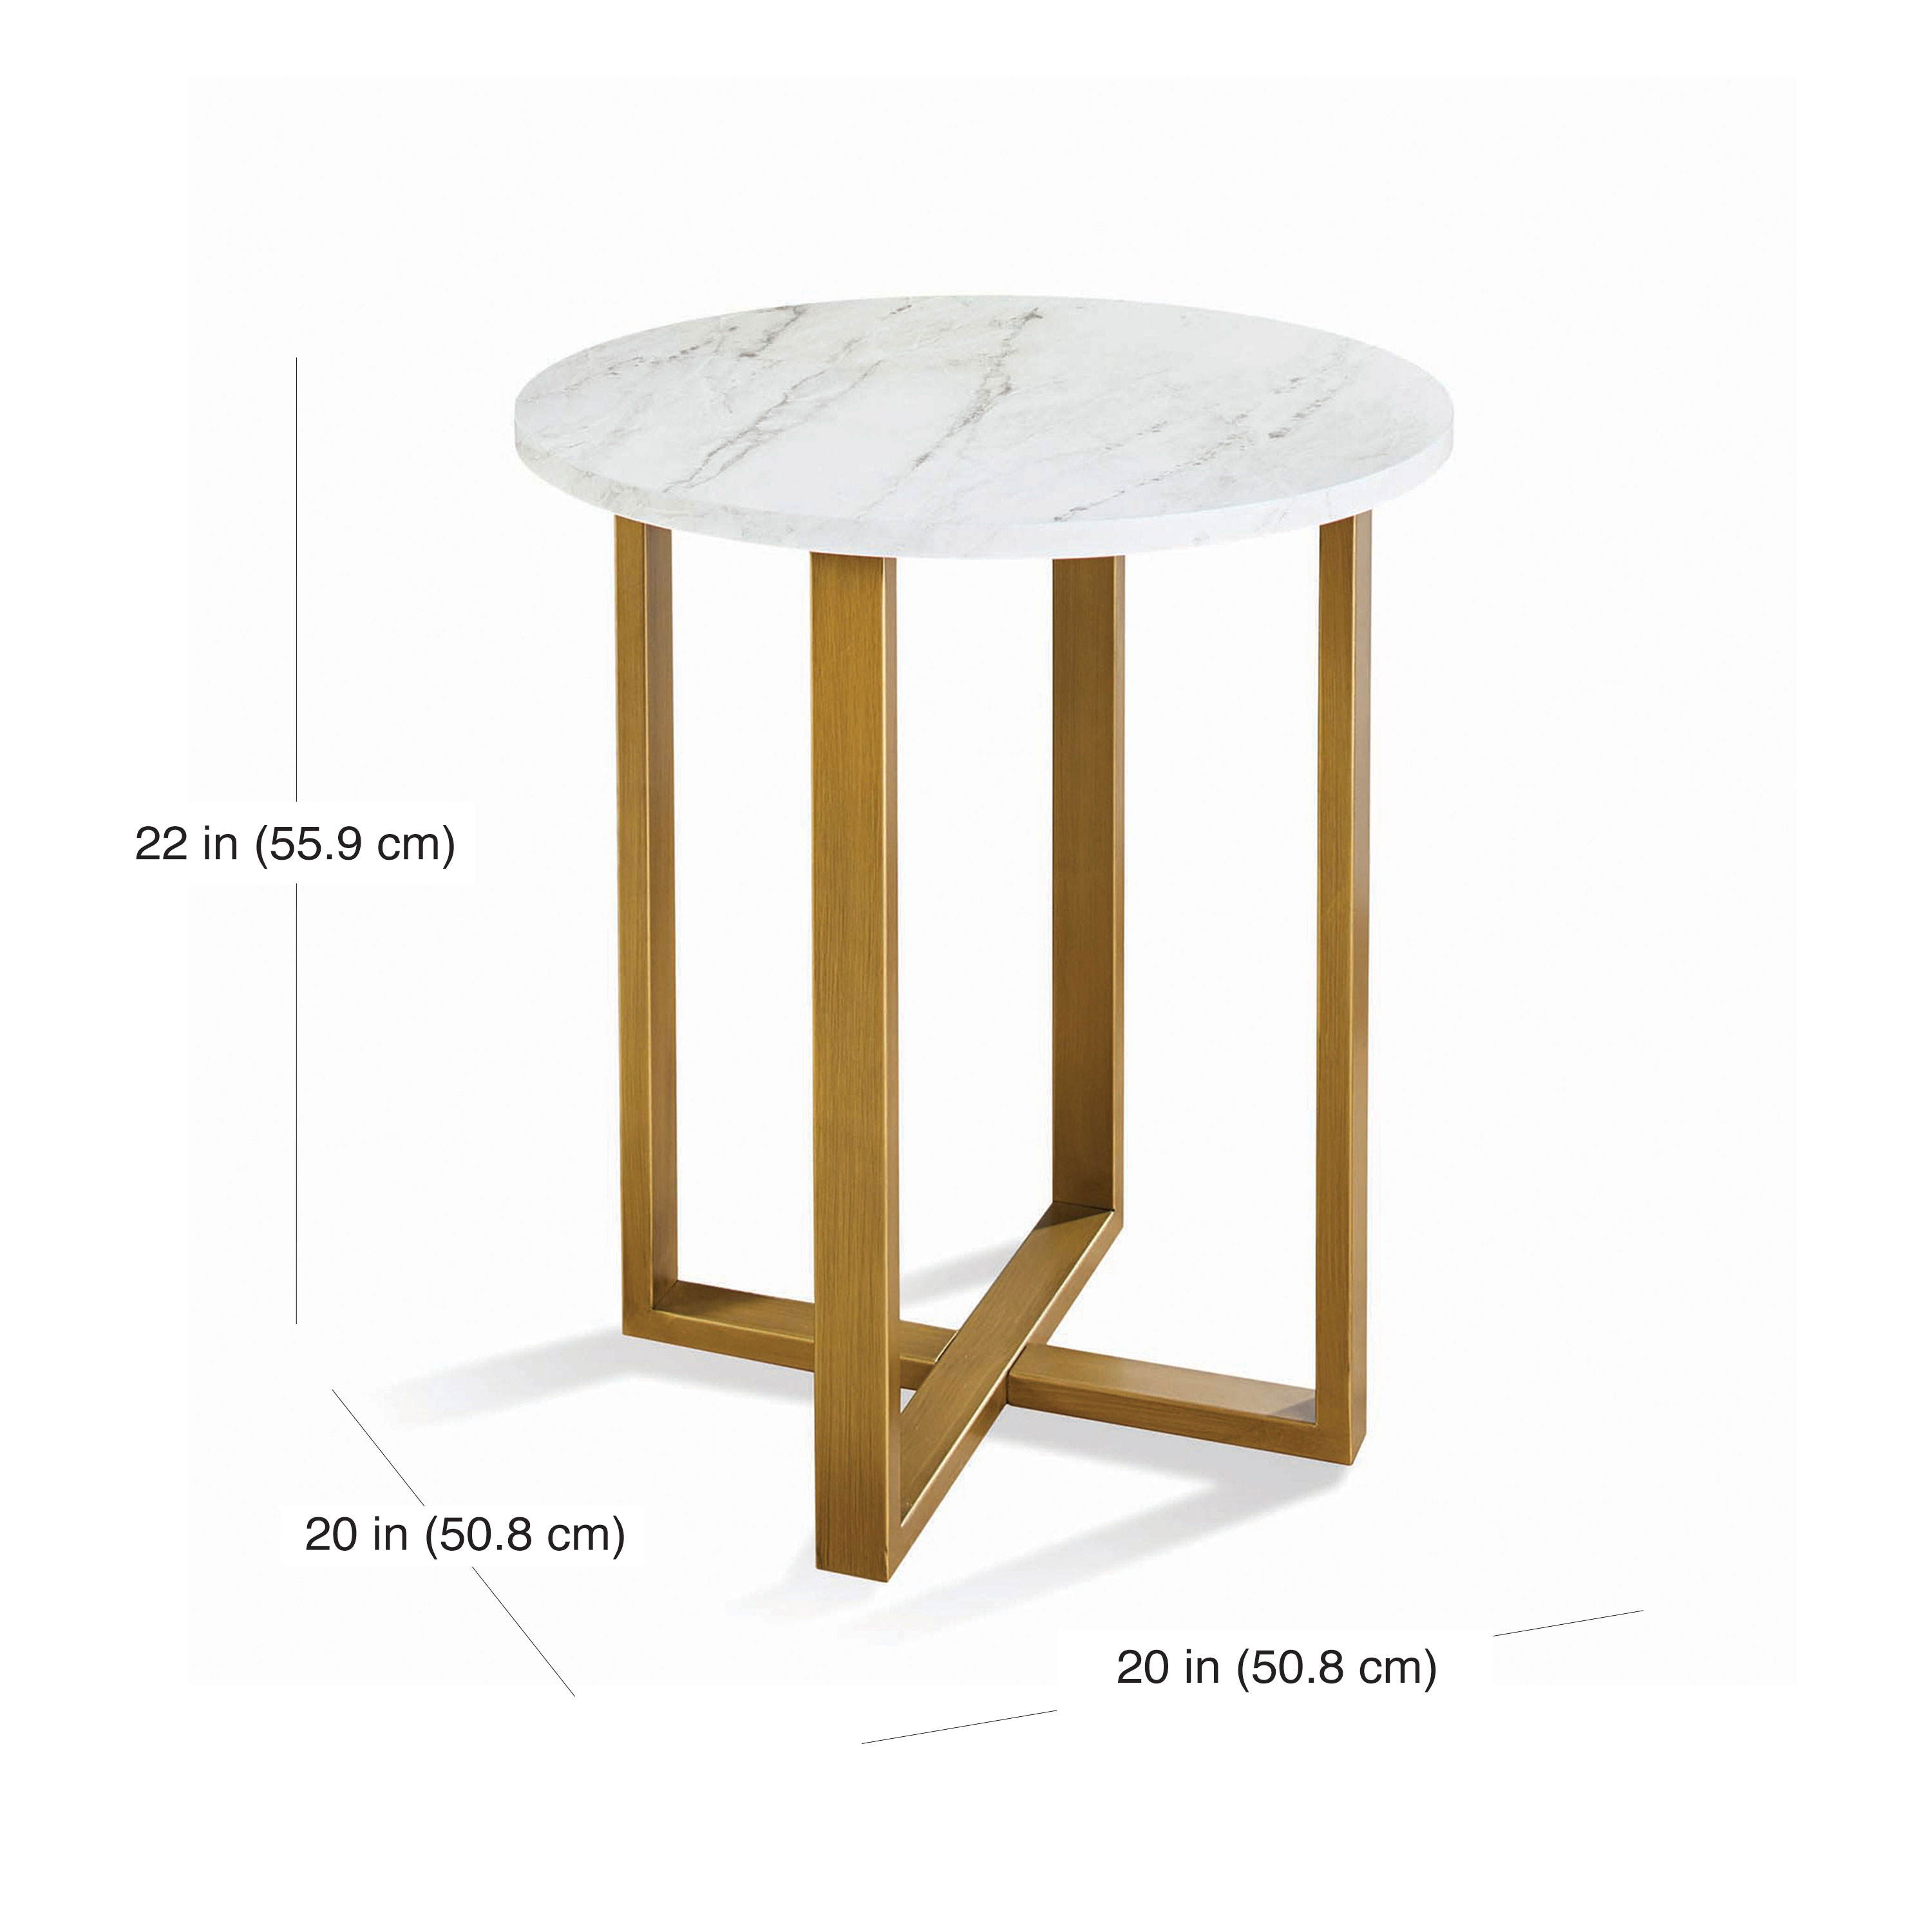 Better Homes & Gardens Lana Marble Side Table - image 3 of 5